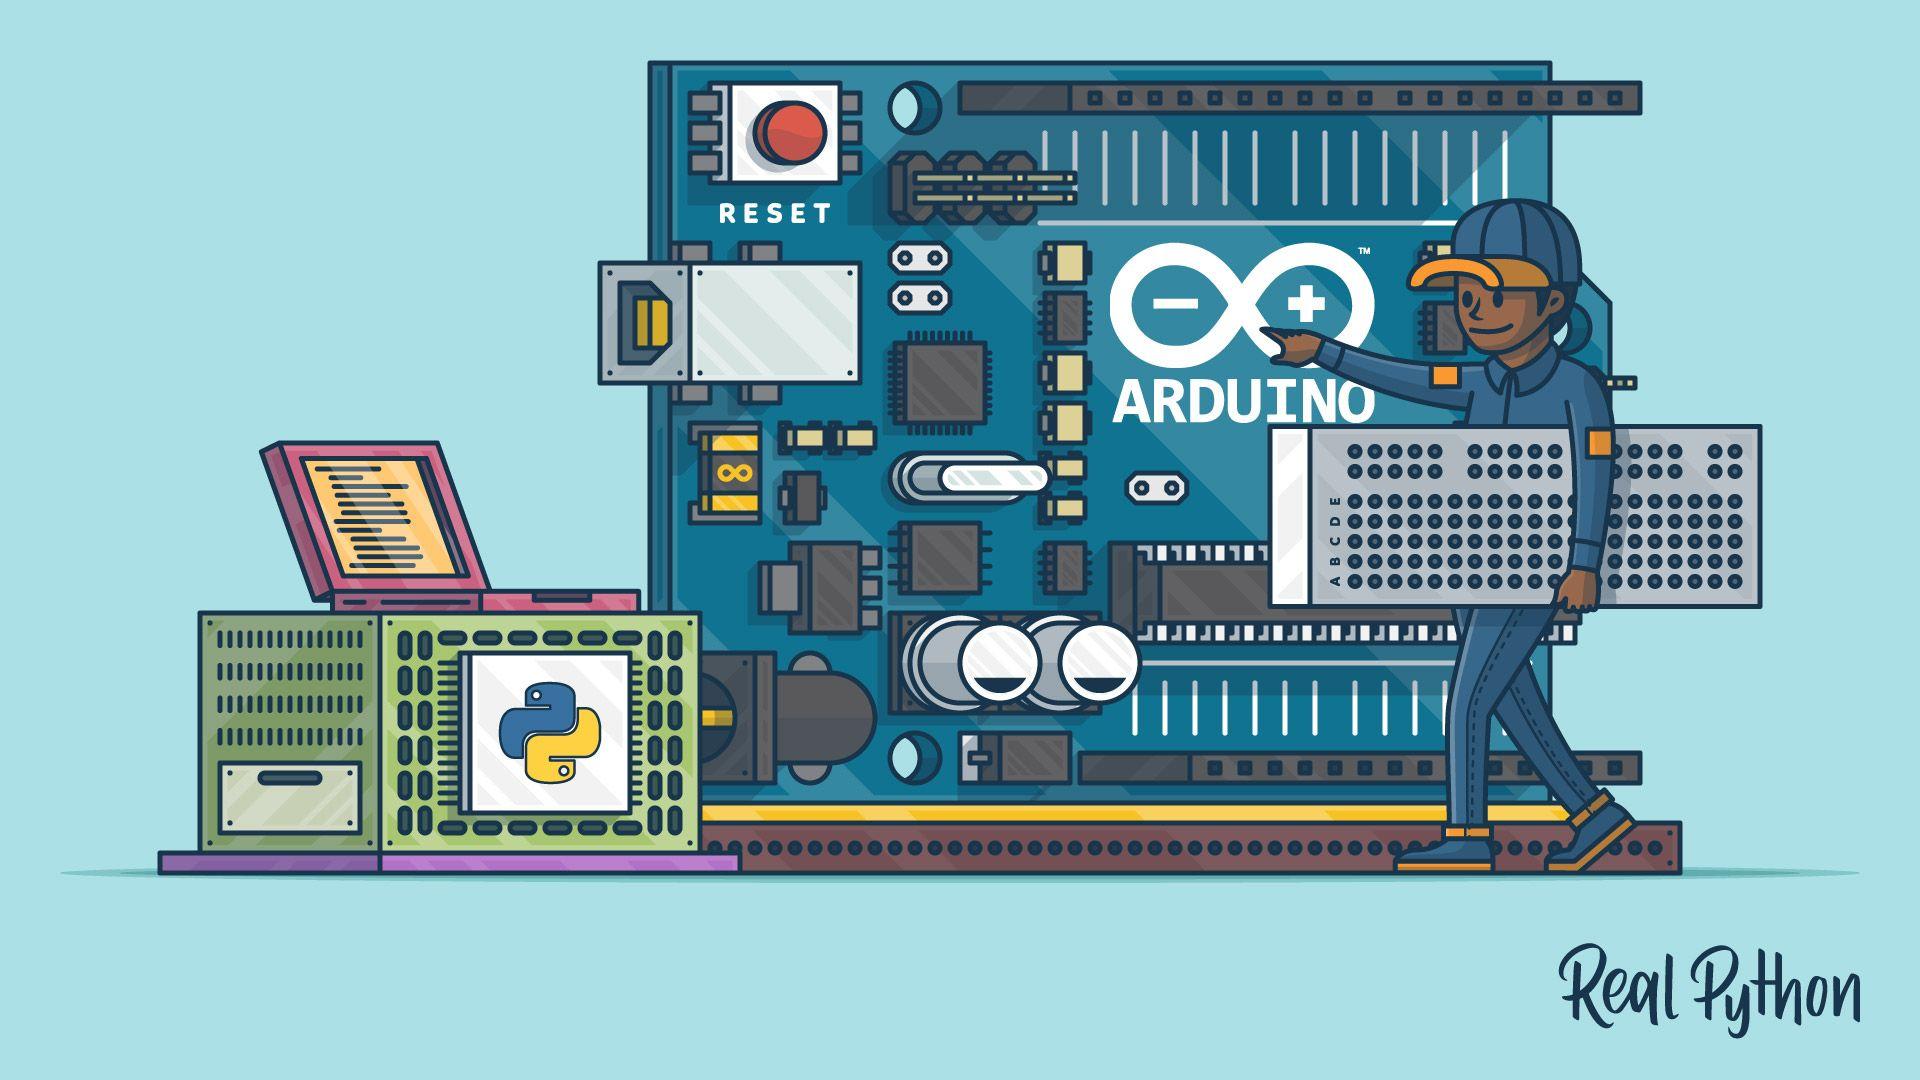 My Arduino wallpaper redesigned for scrolling android wallpapers  rarduino